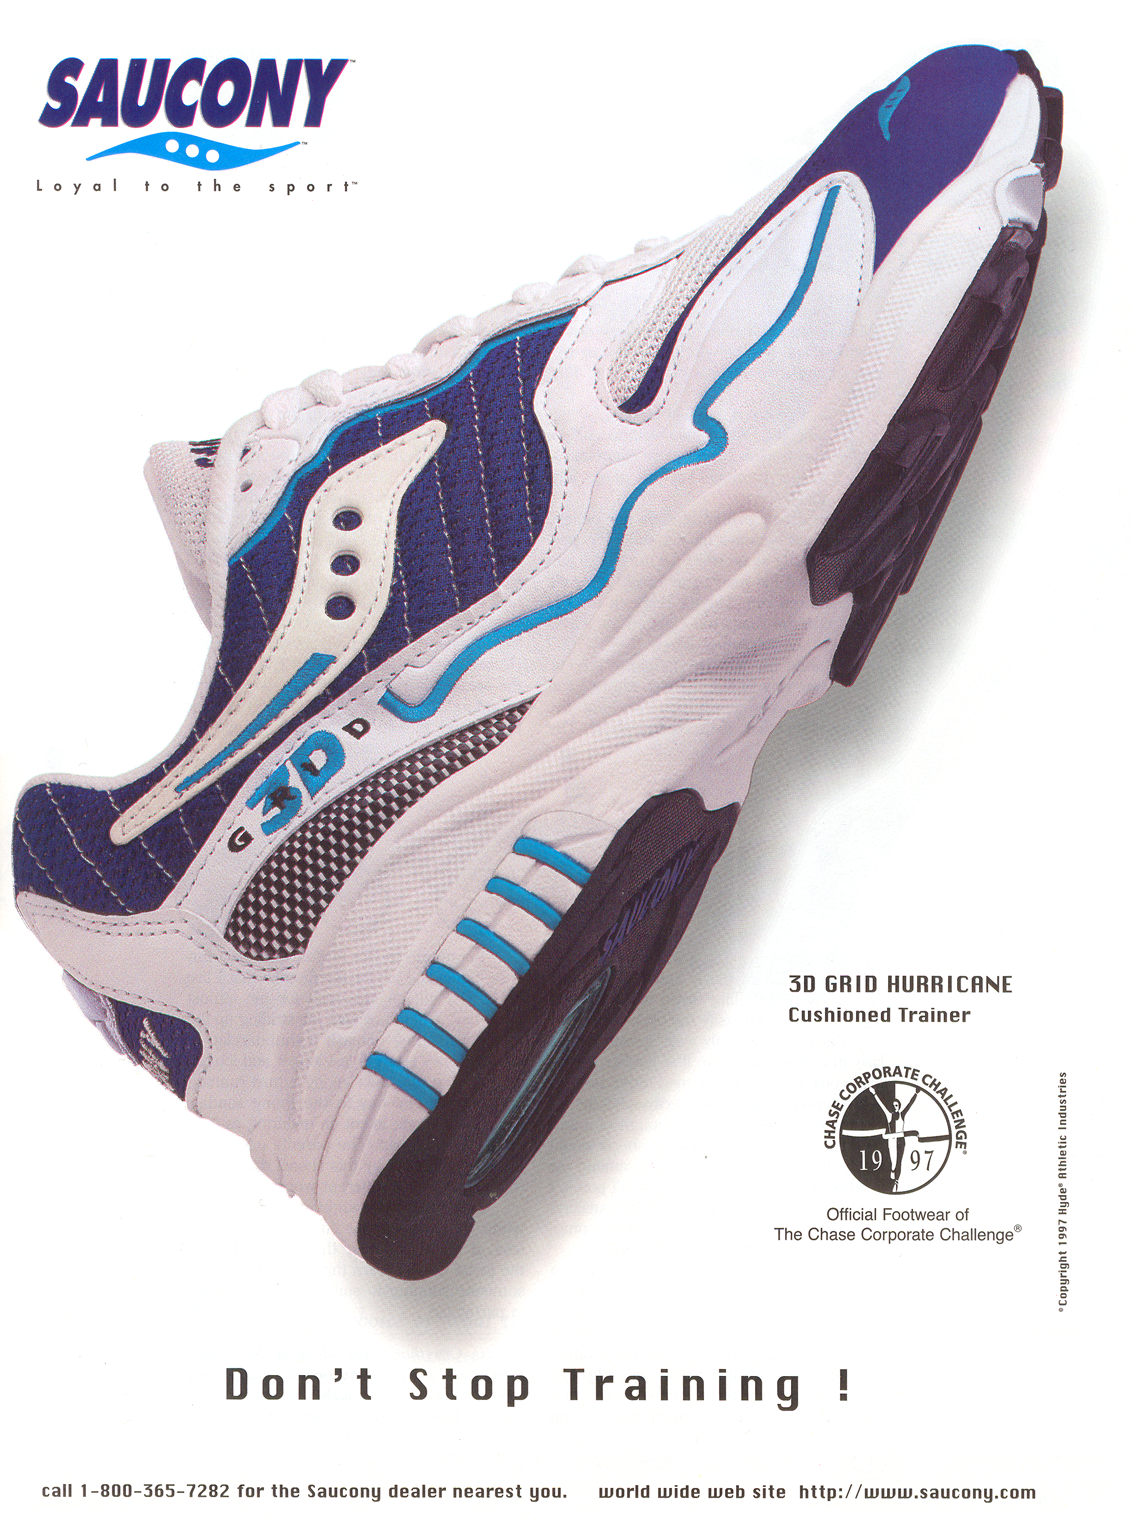 May 1997 – Saucony 3D Grid Hurricane 